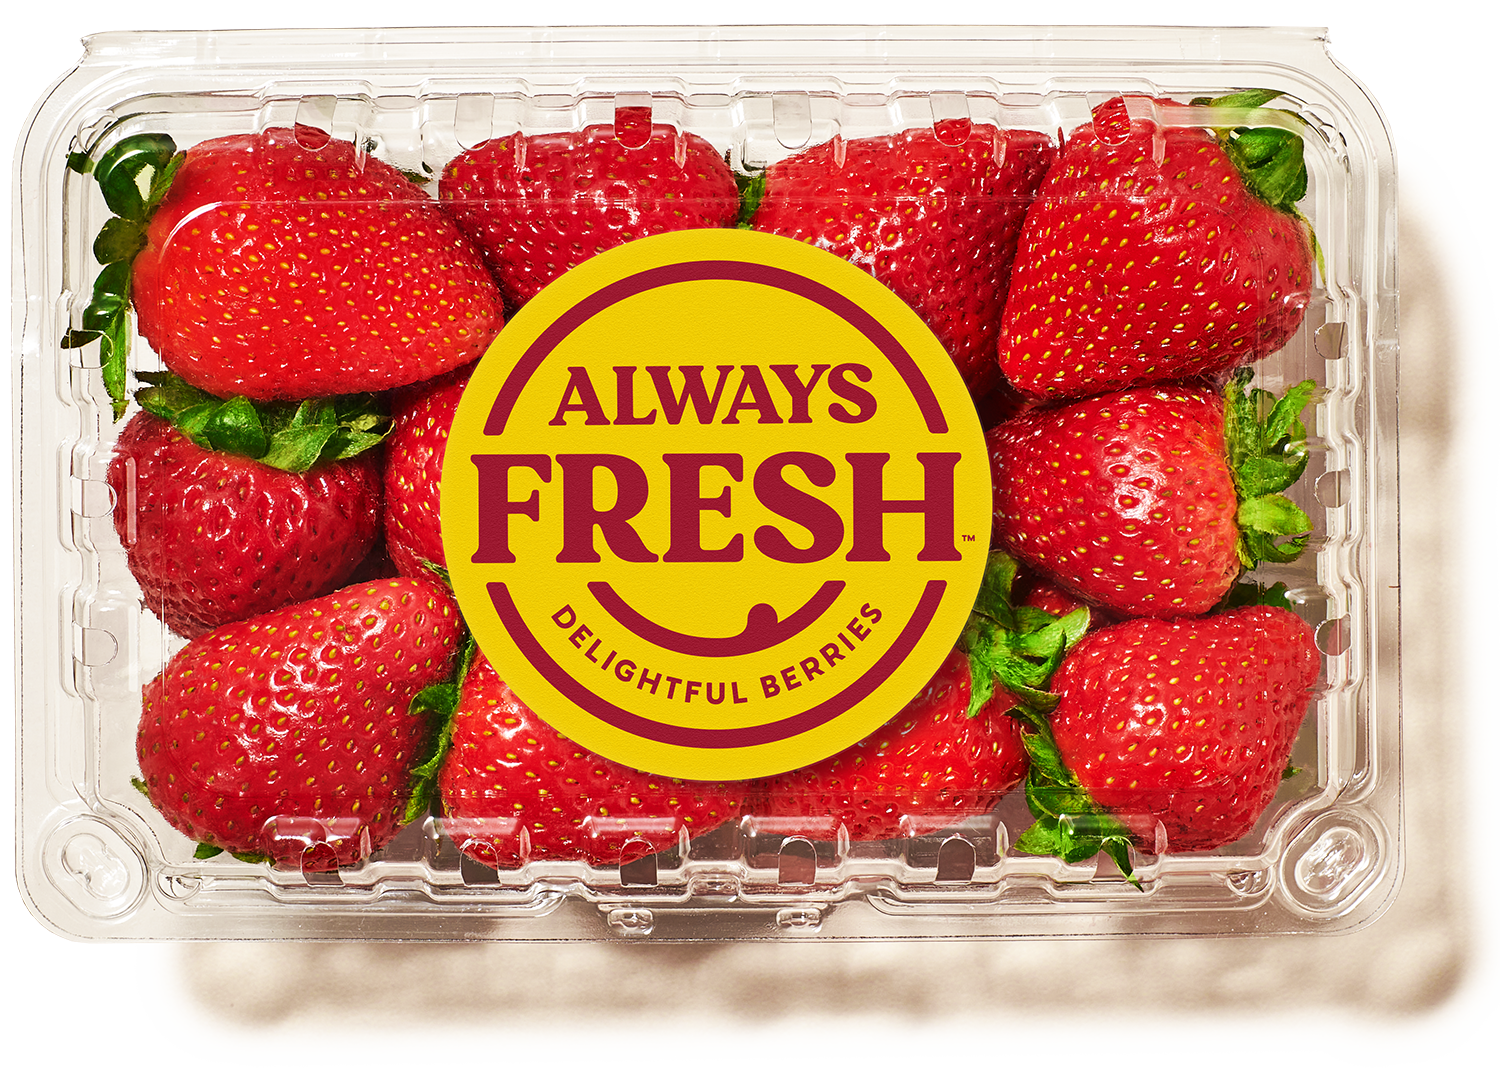 Image of Always Fresh strawberries in clear container with Always Fresh logo and the tag line Delightful Berries.